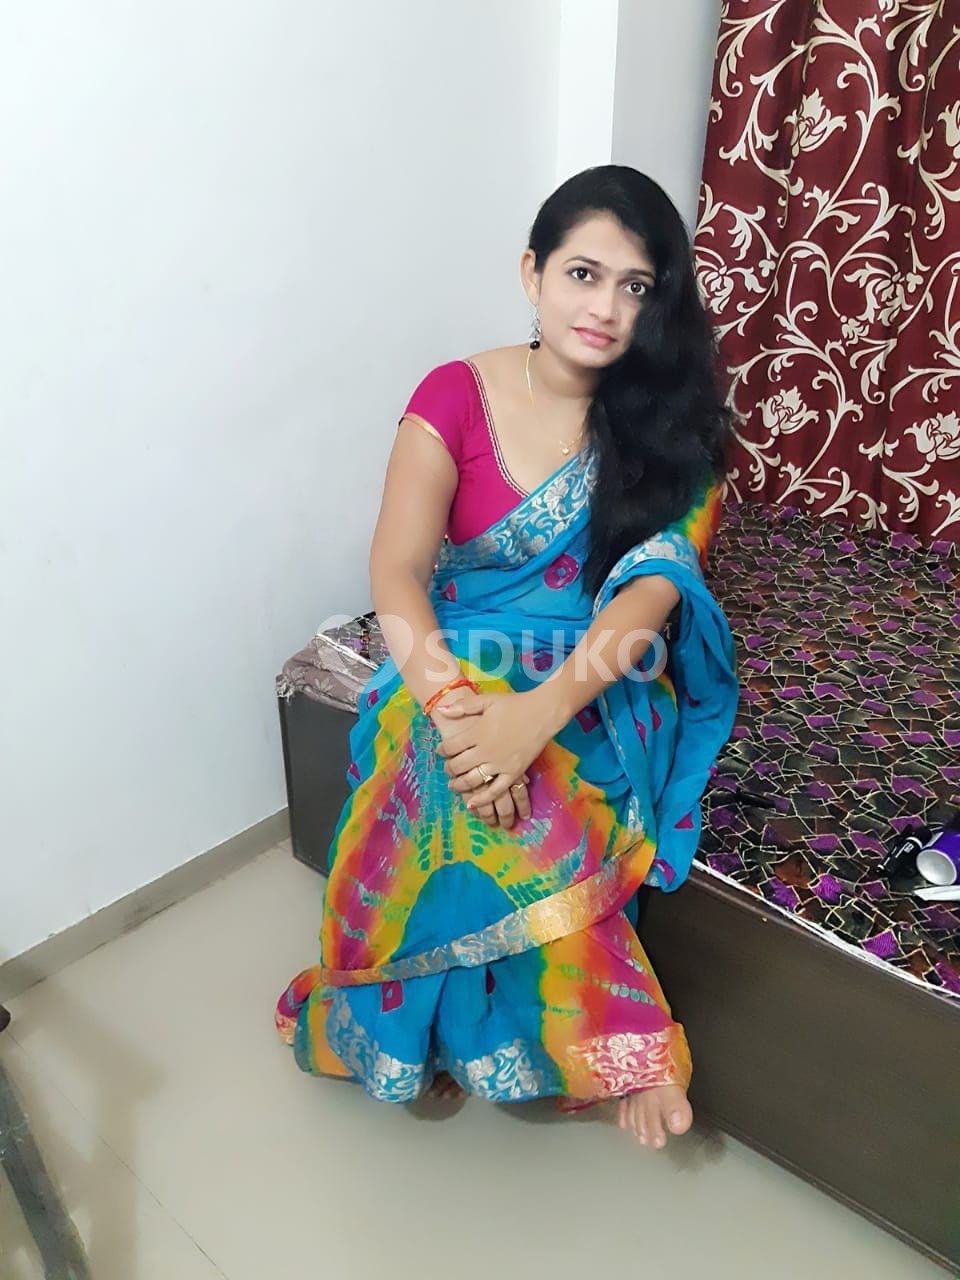 Nashik,,myself.., Mallika TODAY LOW PRICE 100% SAFE AND SECURE GENUINE CALL GIRL AFFORDABLE PRICE CALL NOW